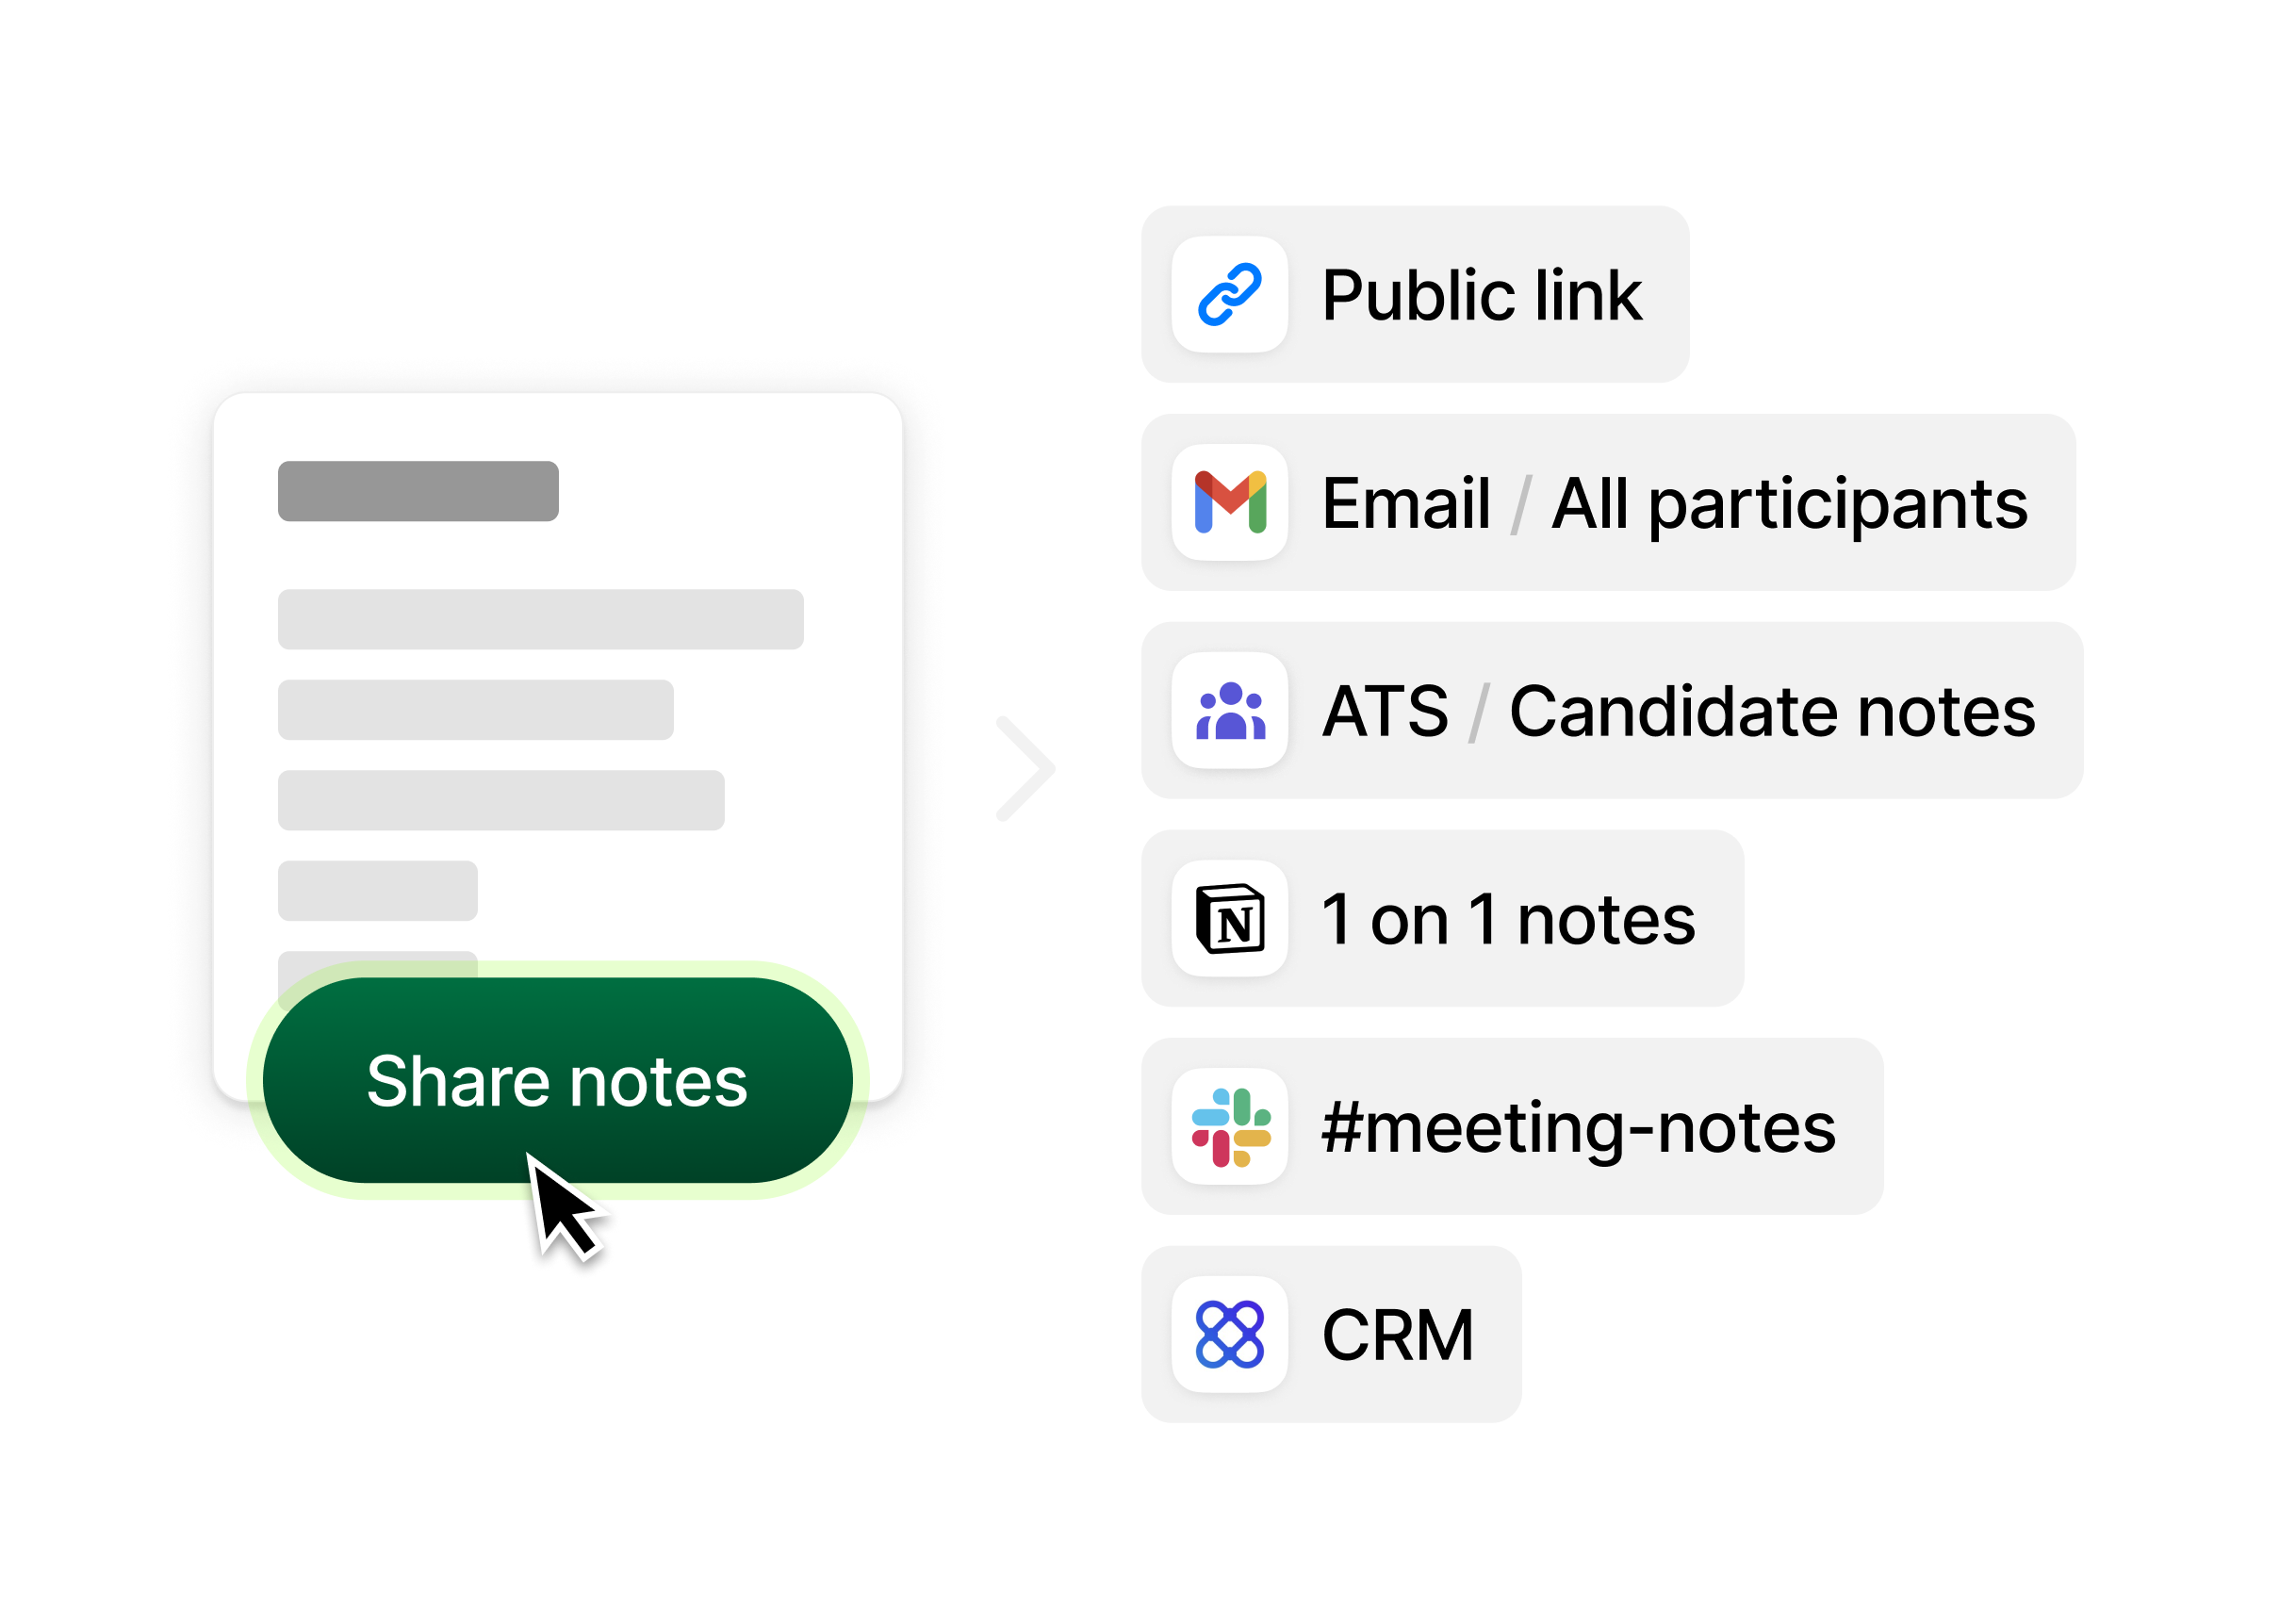 Share your notes with one click